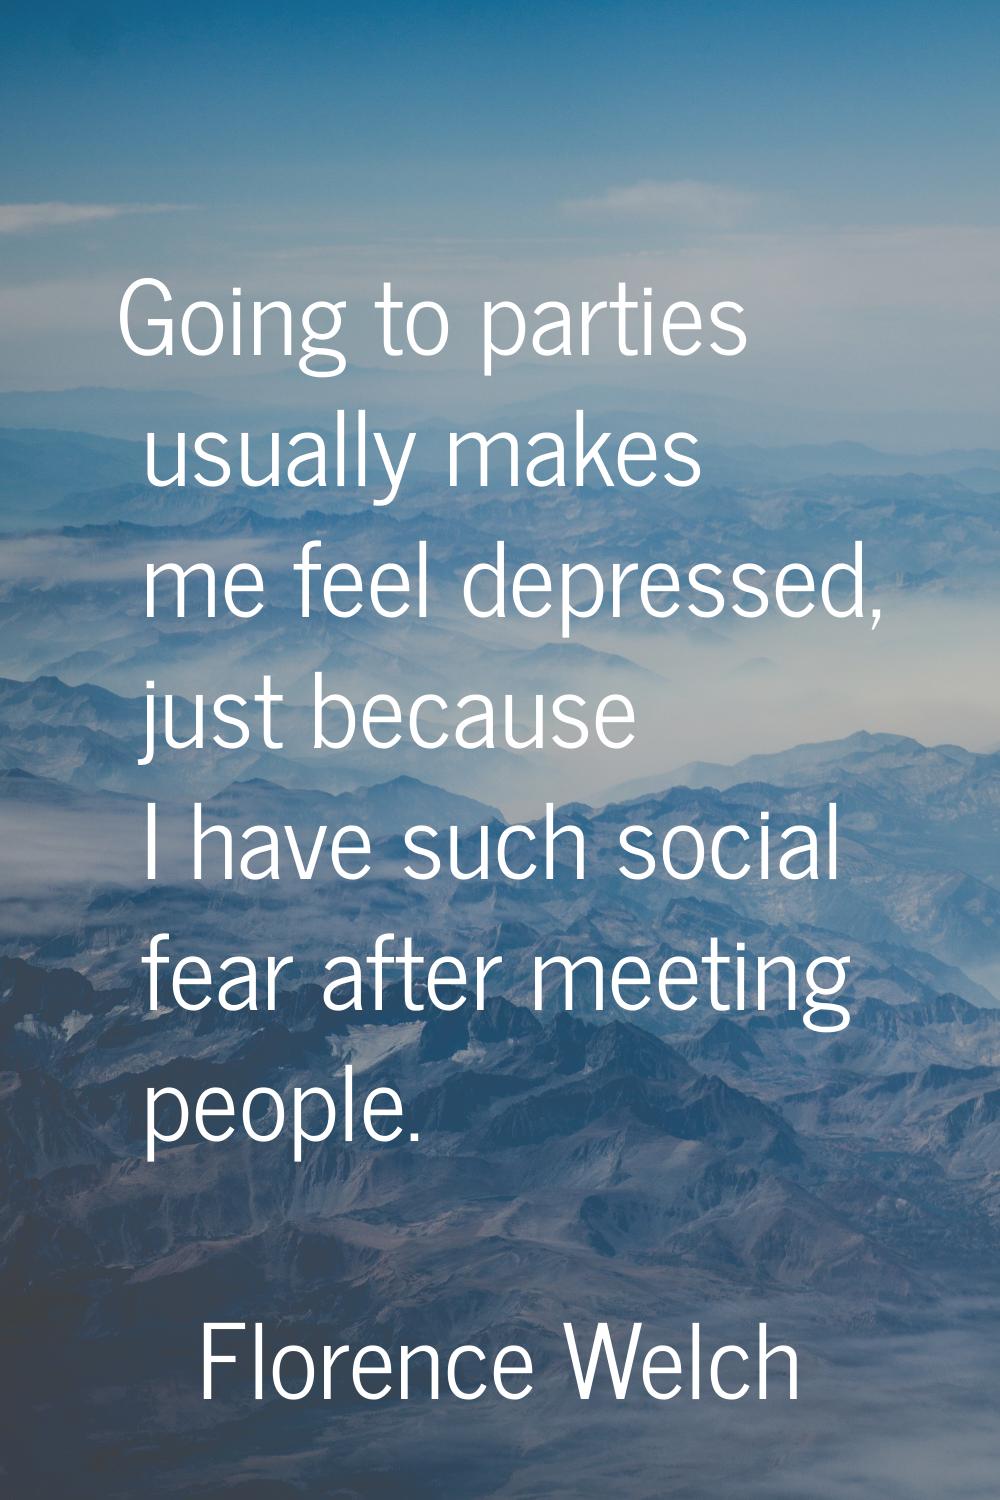 Going to parties usually makes me feel depressed, just because I have such social fear after meetin